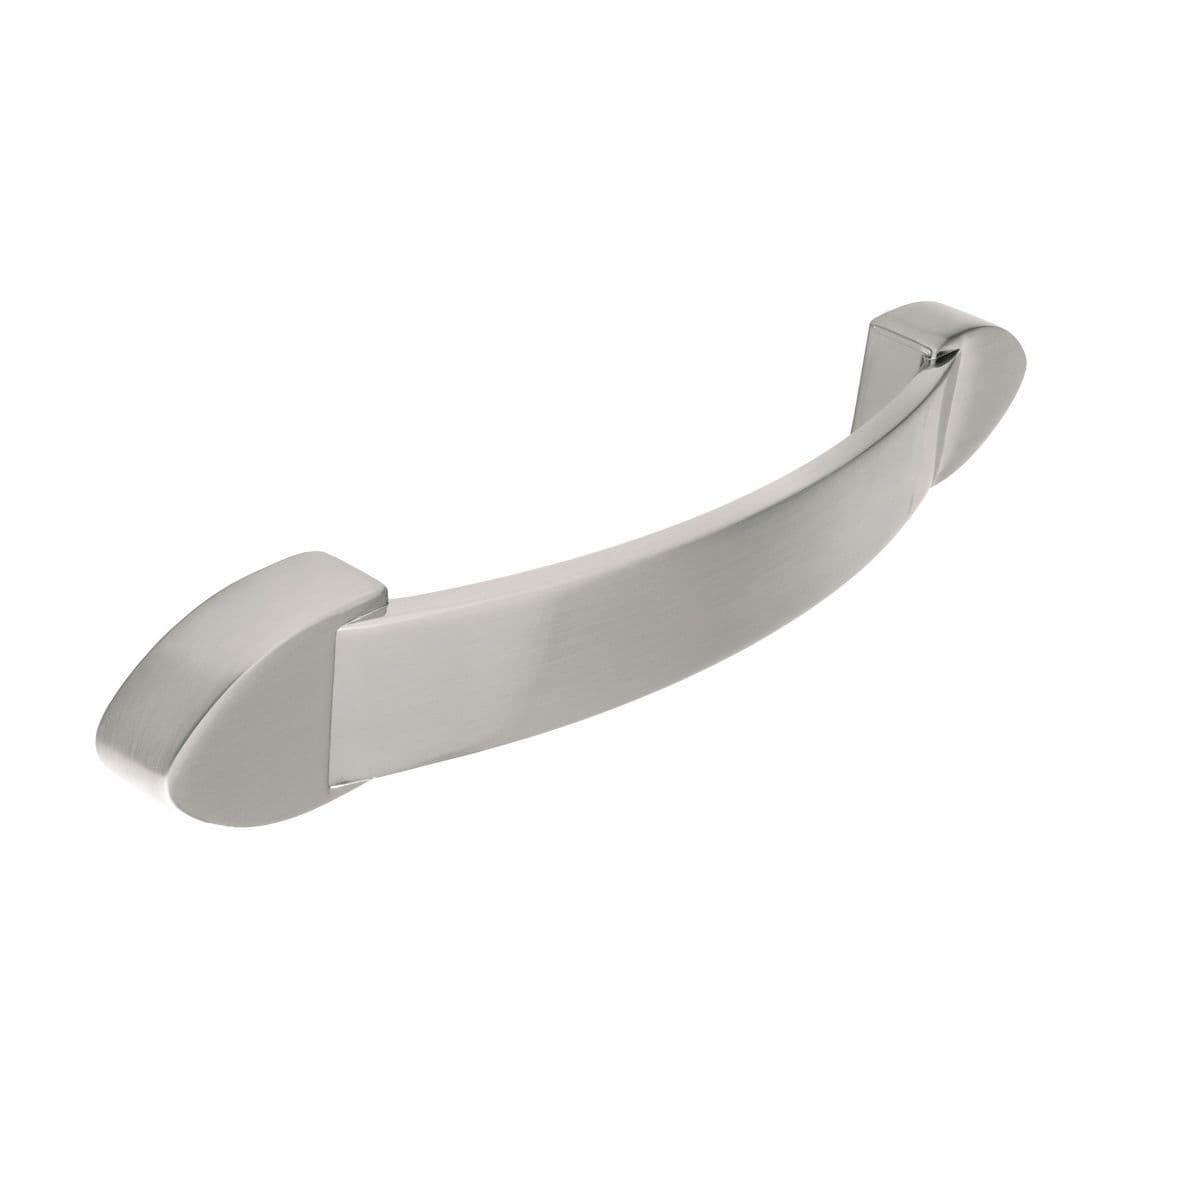 MARRICK ARCH BOW Cupboard Handle -128mm h/c size - POLISHED S/STEEL EFFECT finish (PWS H588.128.SS)